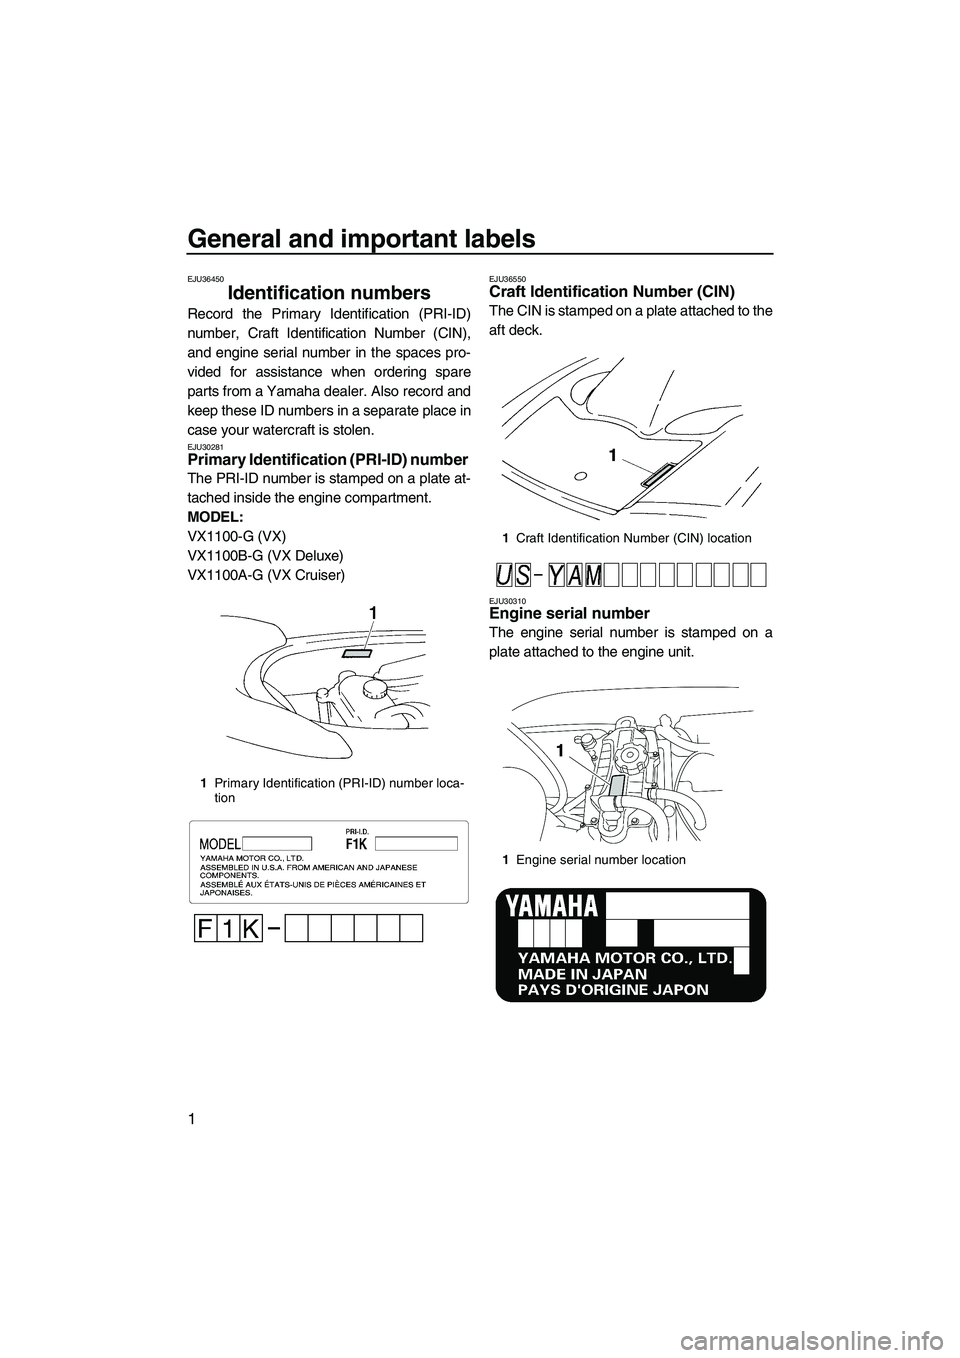 YAMAHA VX SPORT 2008  Owners Manual General and important labels
1
EJU36450
Identification numbers 
Record the Primary Identification (PRI-ID)
number, Craft Identification Number (CIN),
and engine serial number in the spaces pro-
vided 